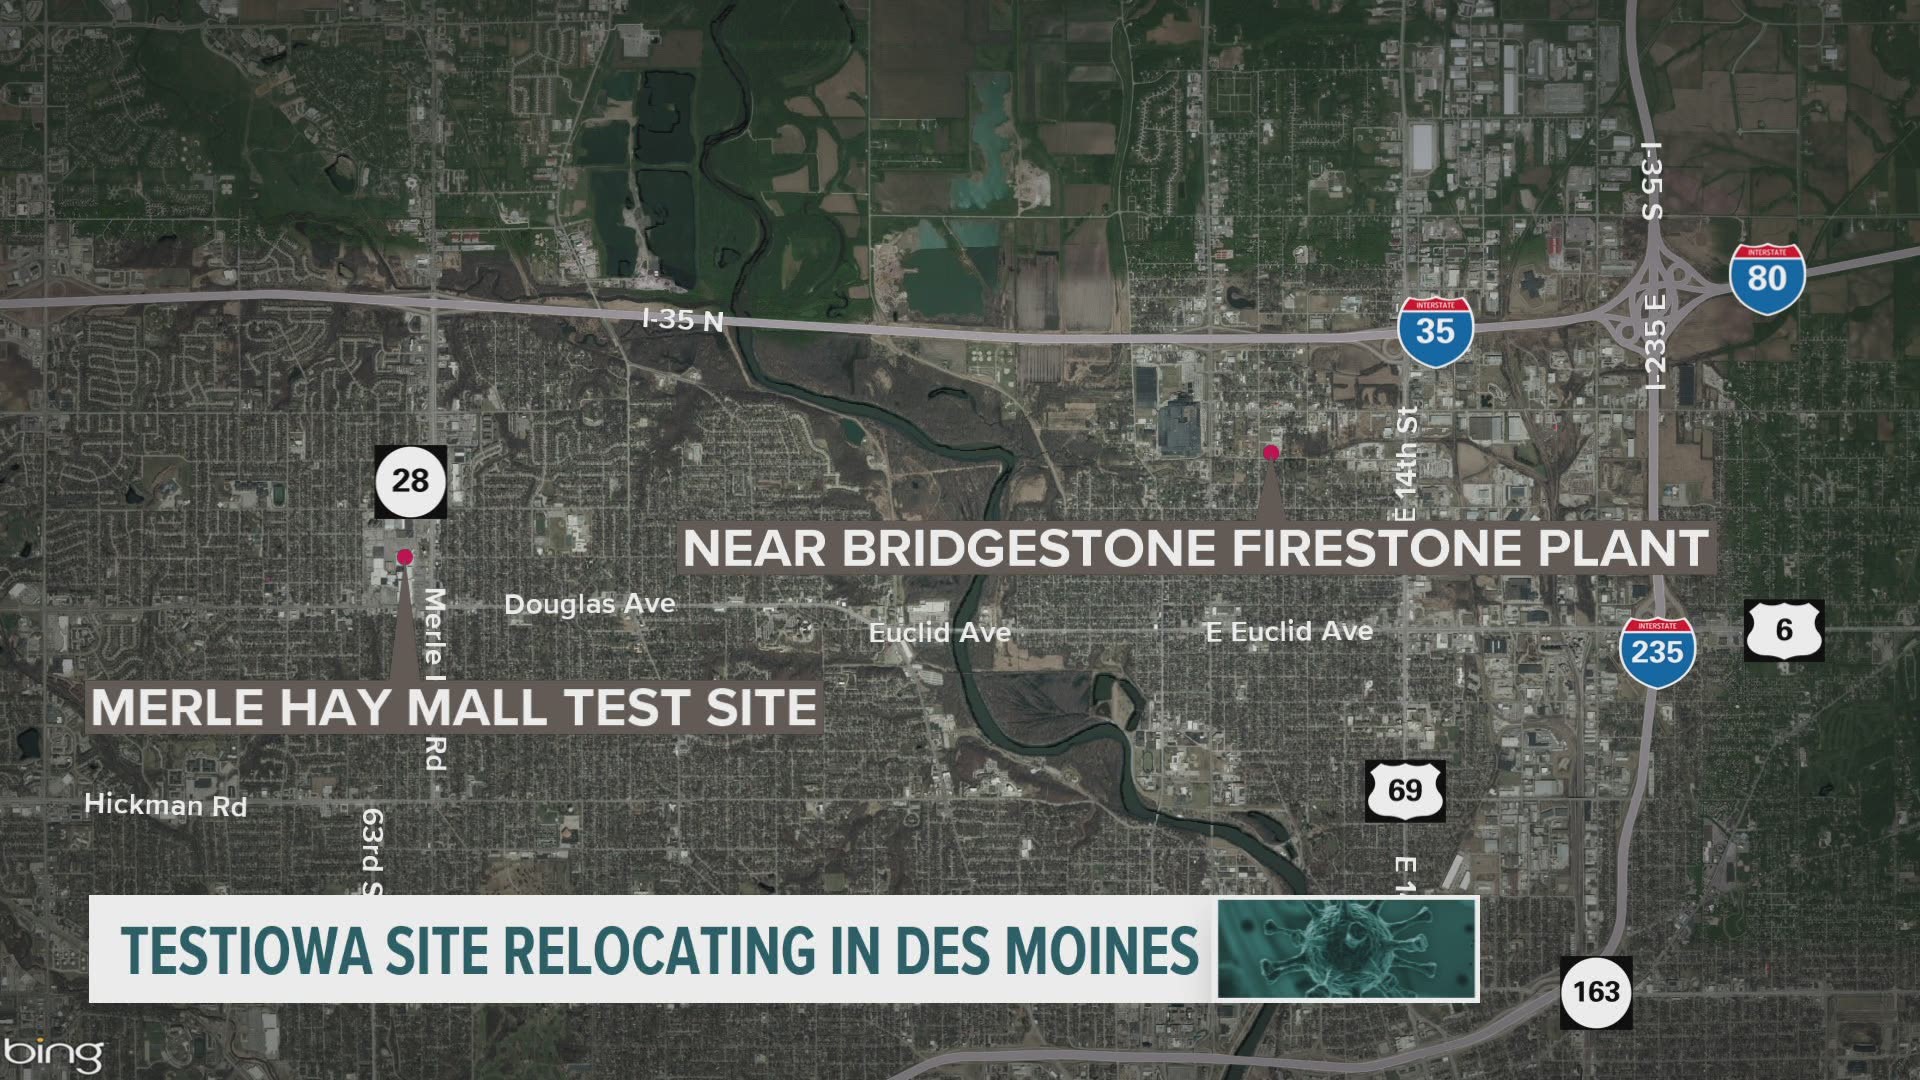 The TestIowa site near Merle Hay Mall is moving crosstown near the Bridgestone Firestone plant in Des Moines, state leaders said Thursday.